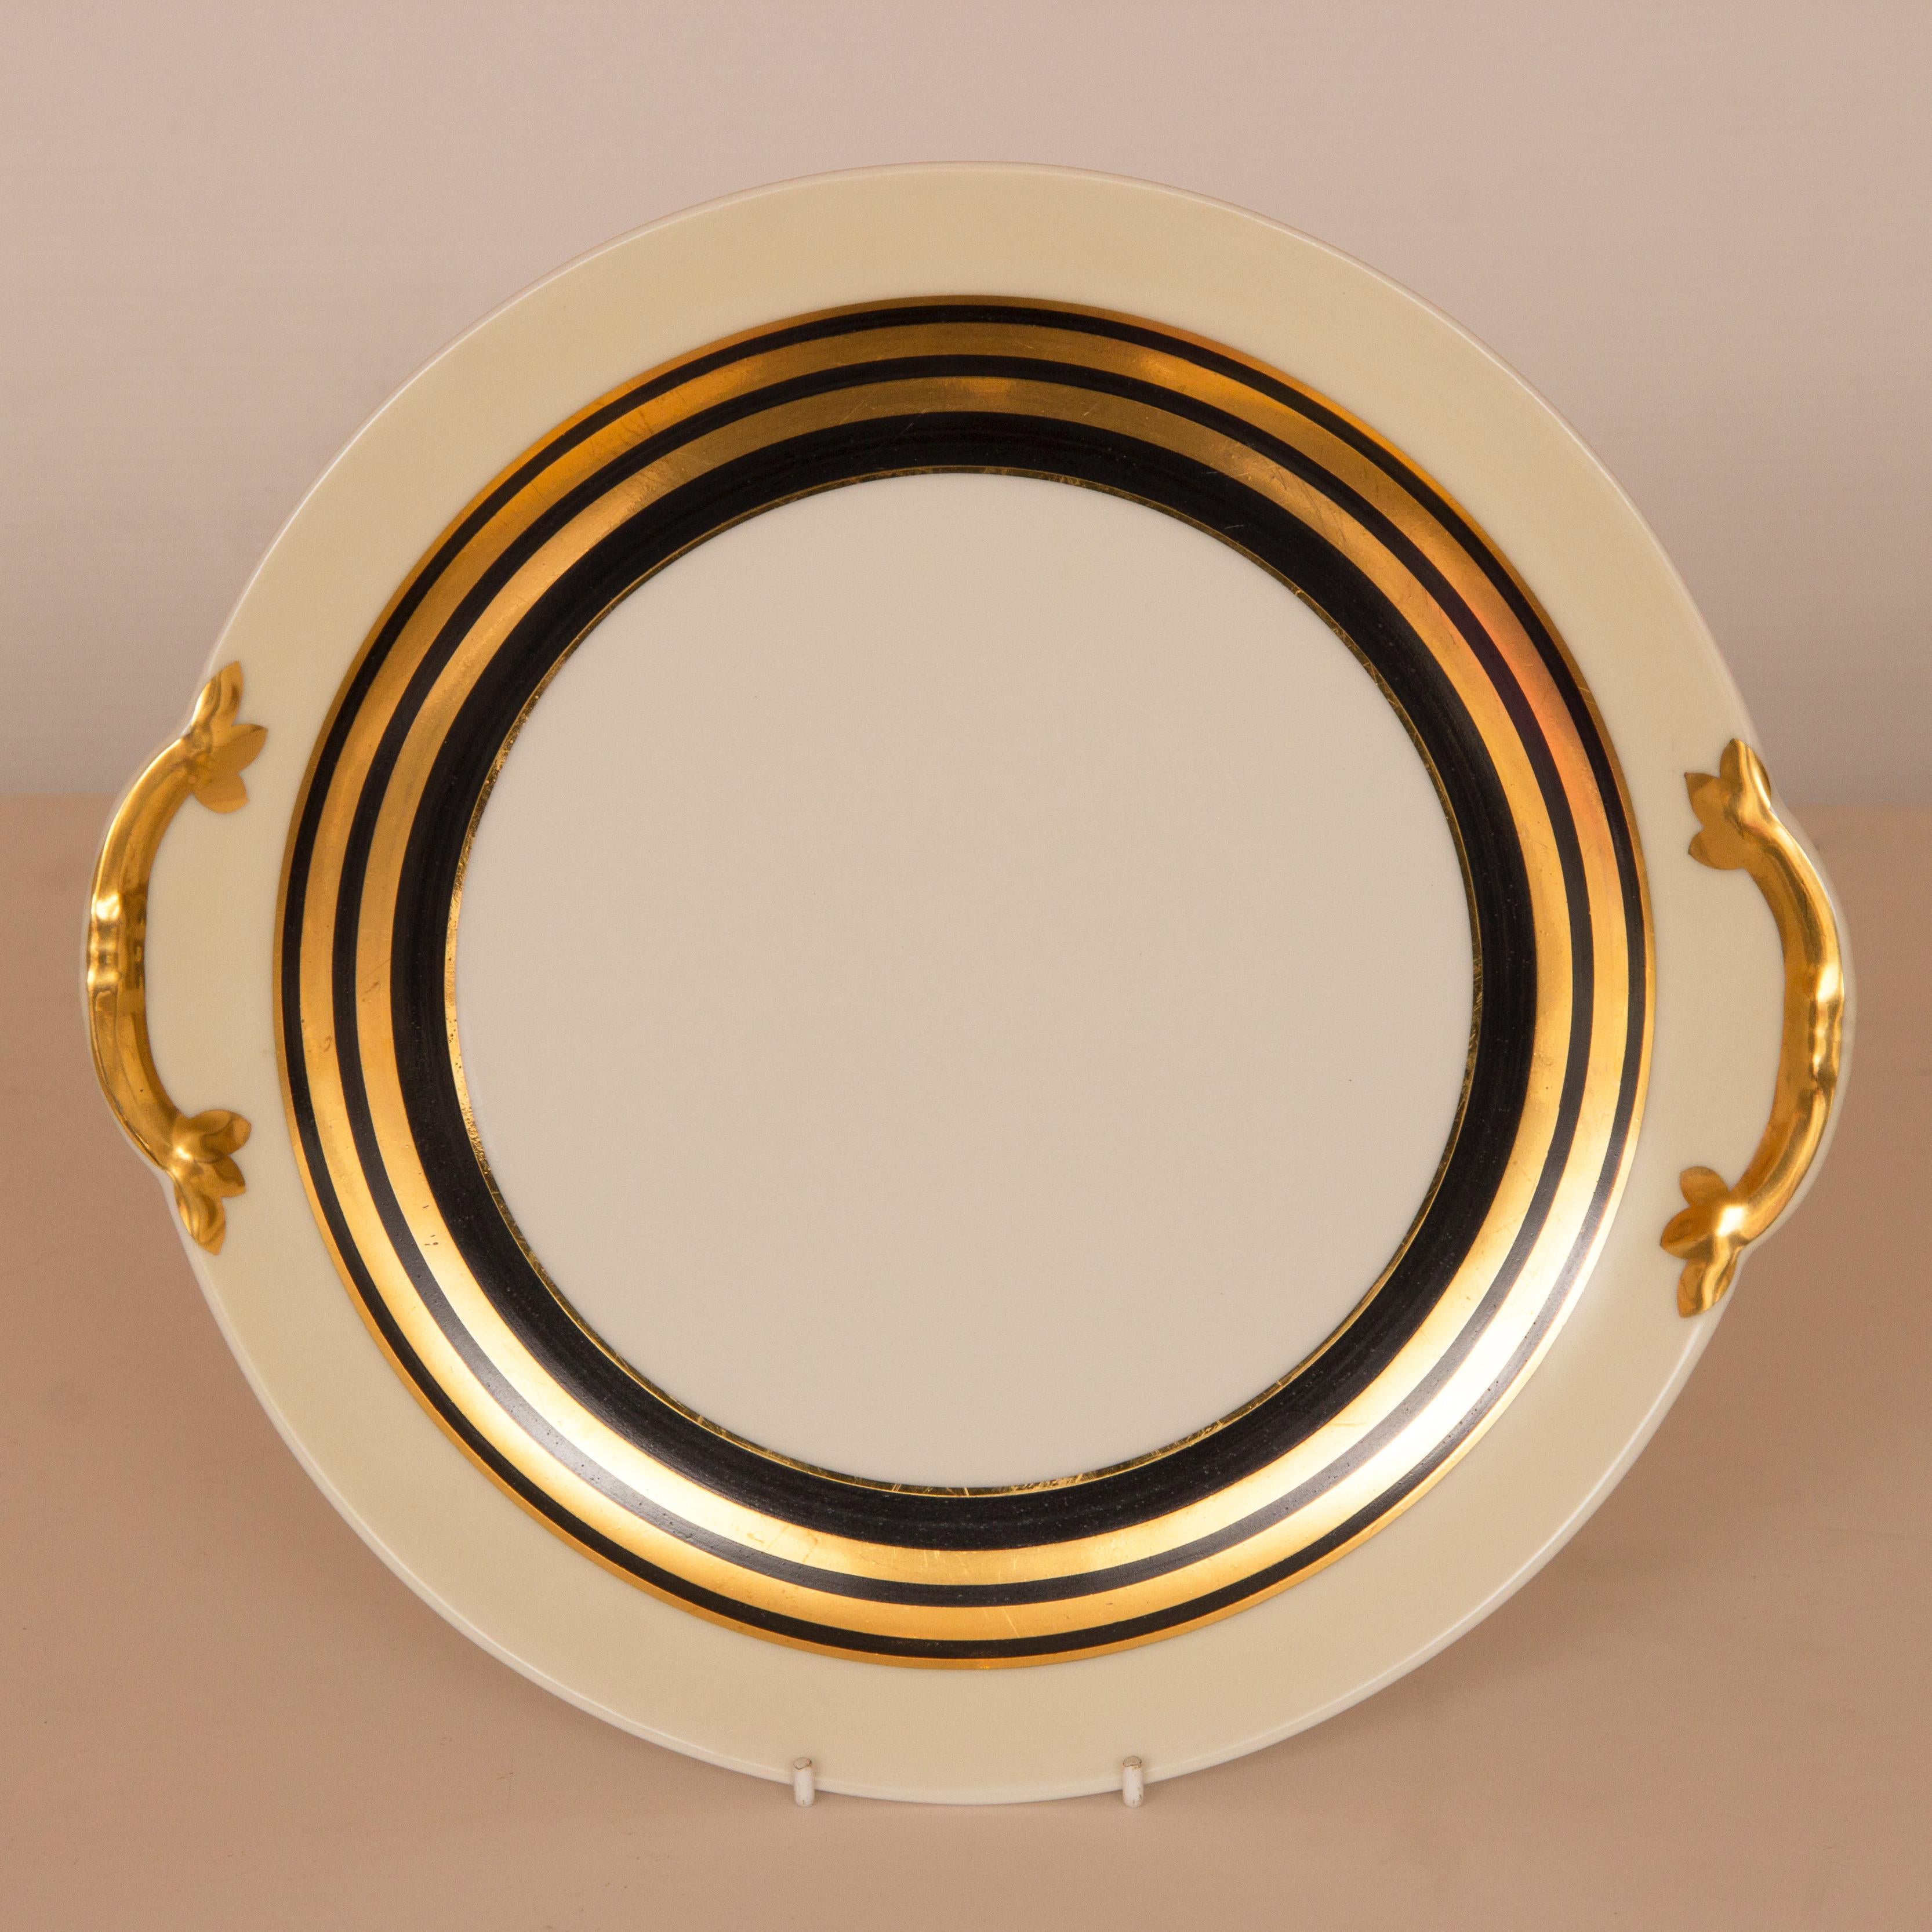 A fine Art Deco tea service in a black and gold wedding band design on a cream ground.
this fine bone china tea set was designed by Charles Ahrenfeldt for Limoges, Charles Ahrenfeldt was the art director at limoges.
Measures: Platter H: 3 cm W: 30